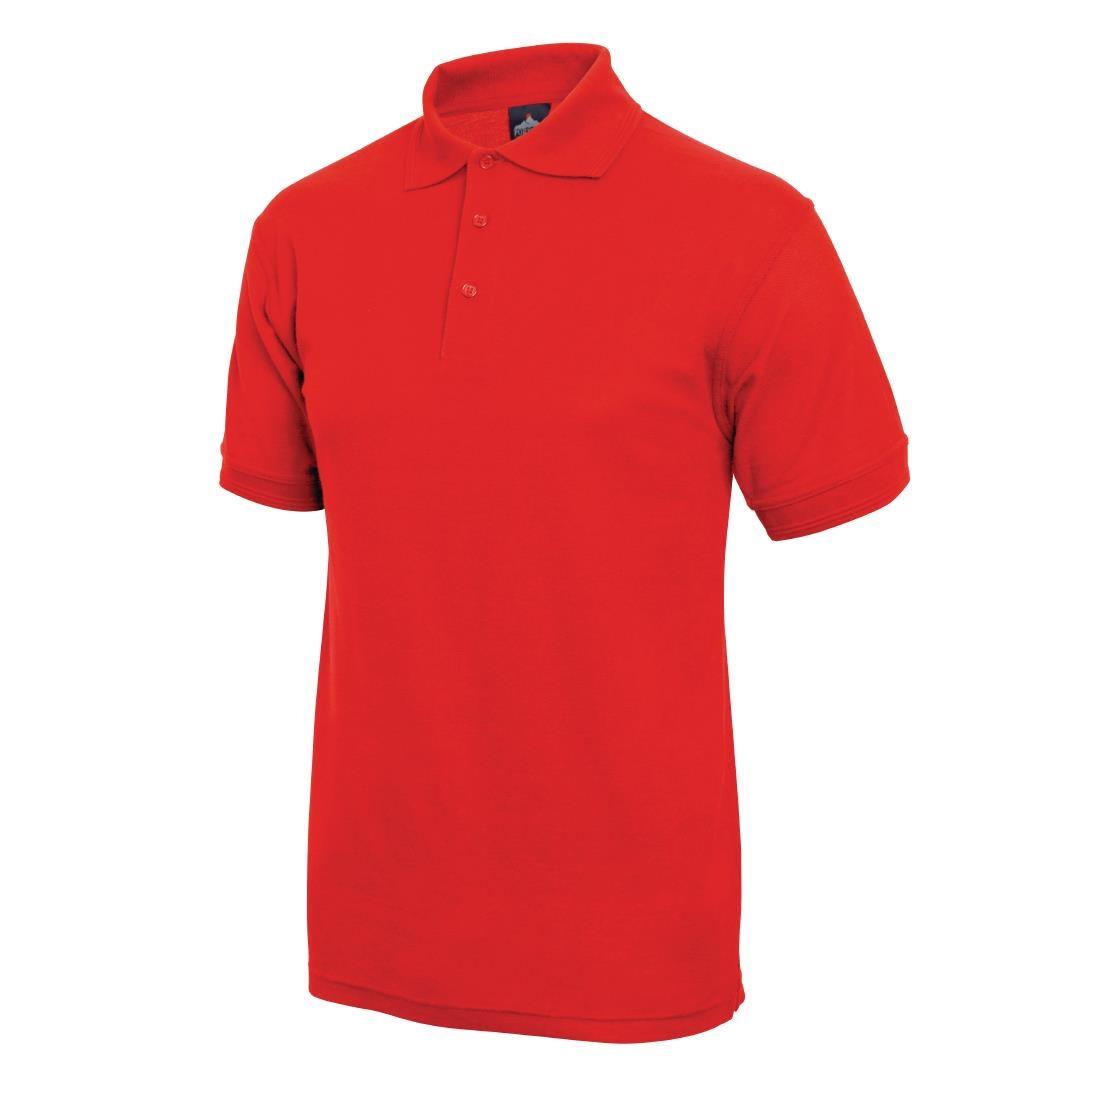 Unisex Polo Shirt Red M - A762-M  - 2